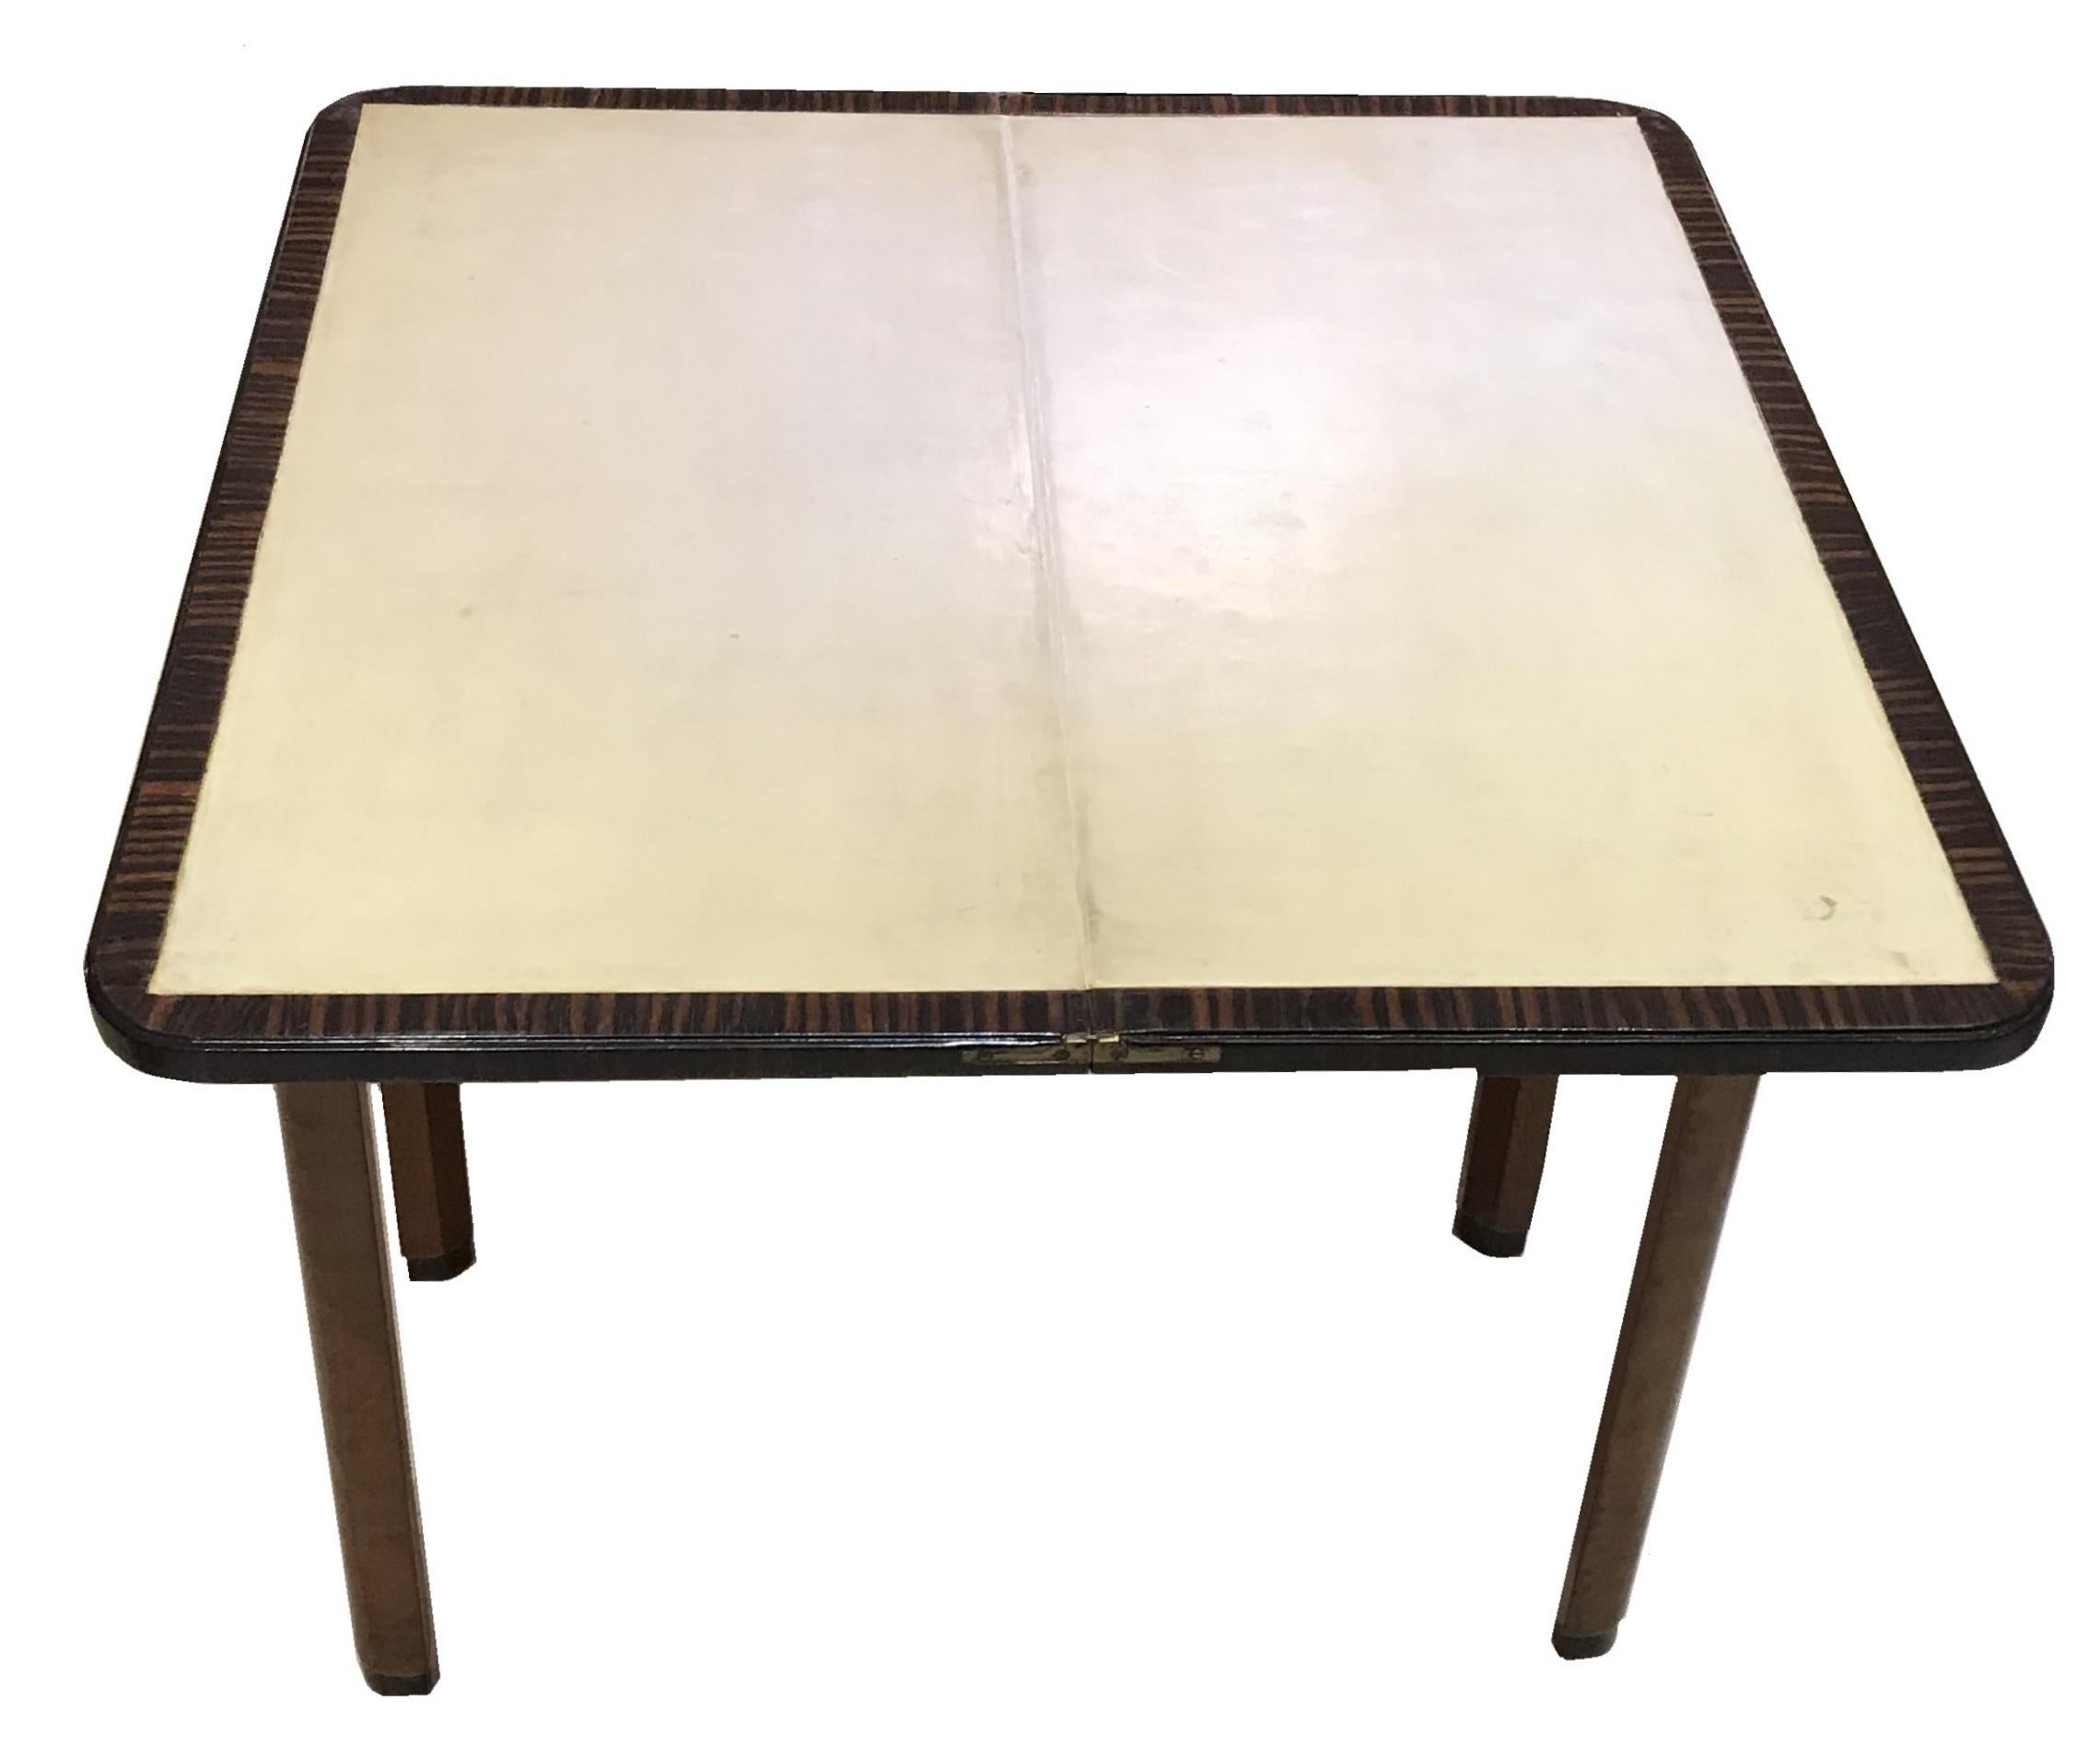 Book Table with Wood and Parchment 'Leather',

Year: 1920
Country: French
Wood and parchment (leather)
It is an elegant and sophisticated dining table.
You want to live in the golden years, this is the dining table that your project needs.
We have